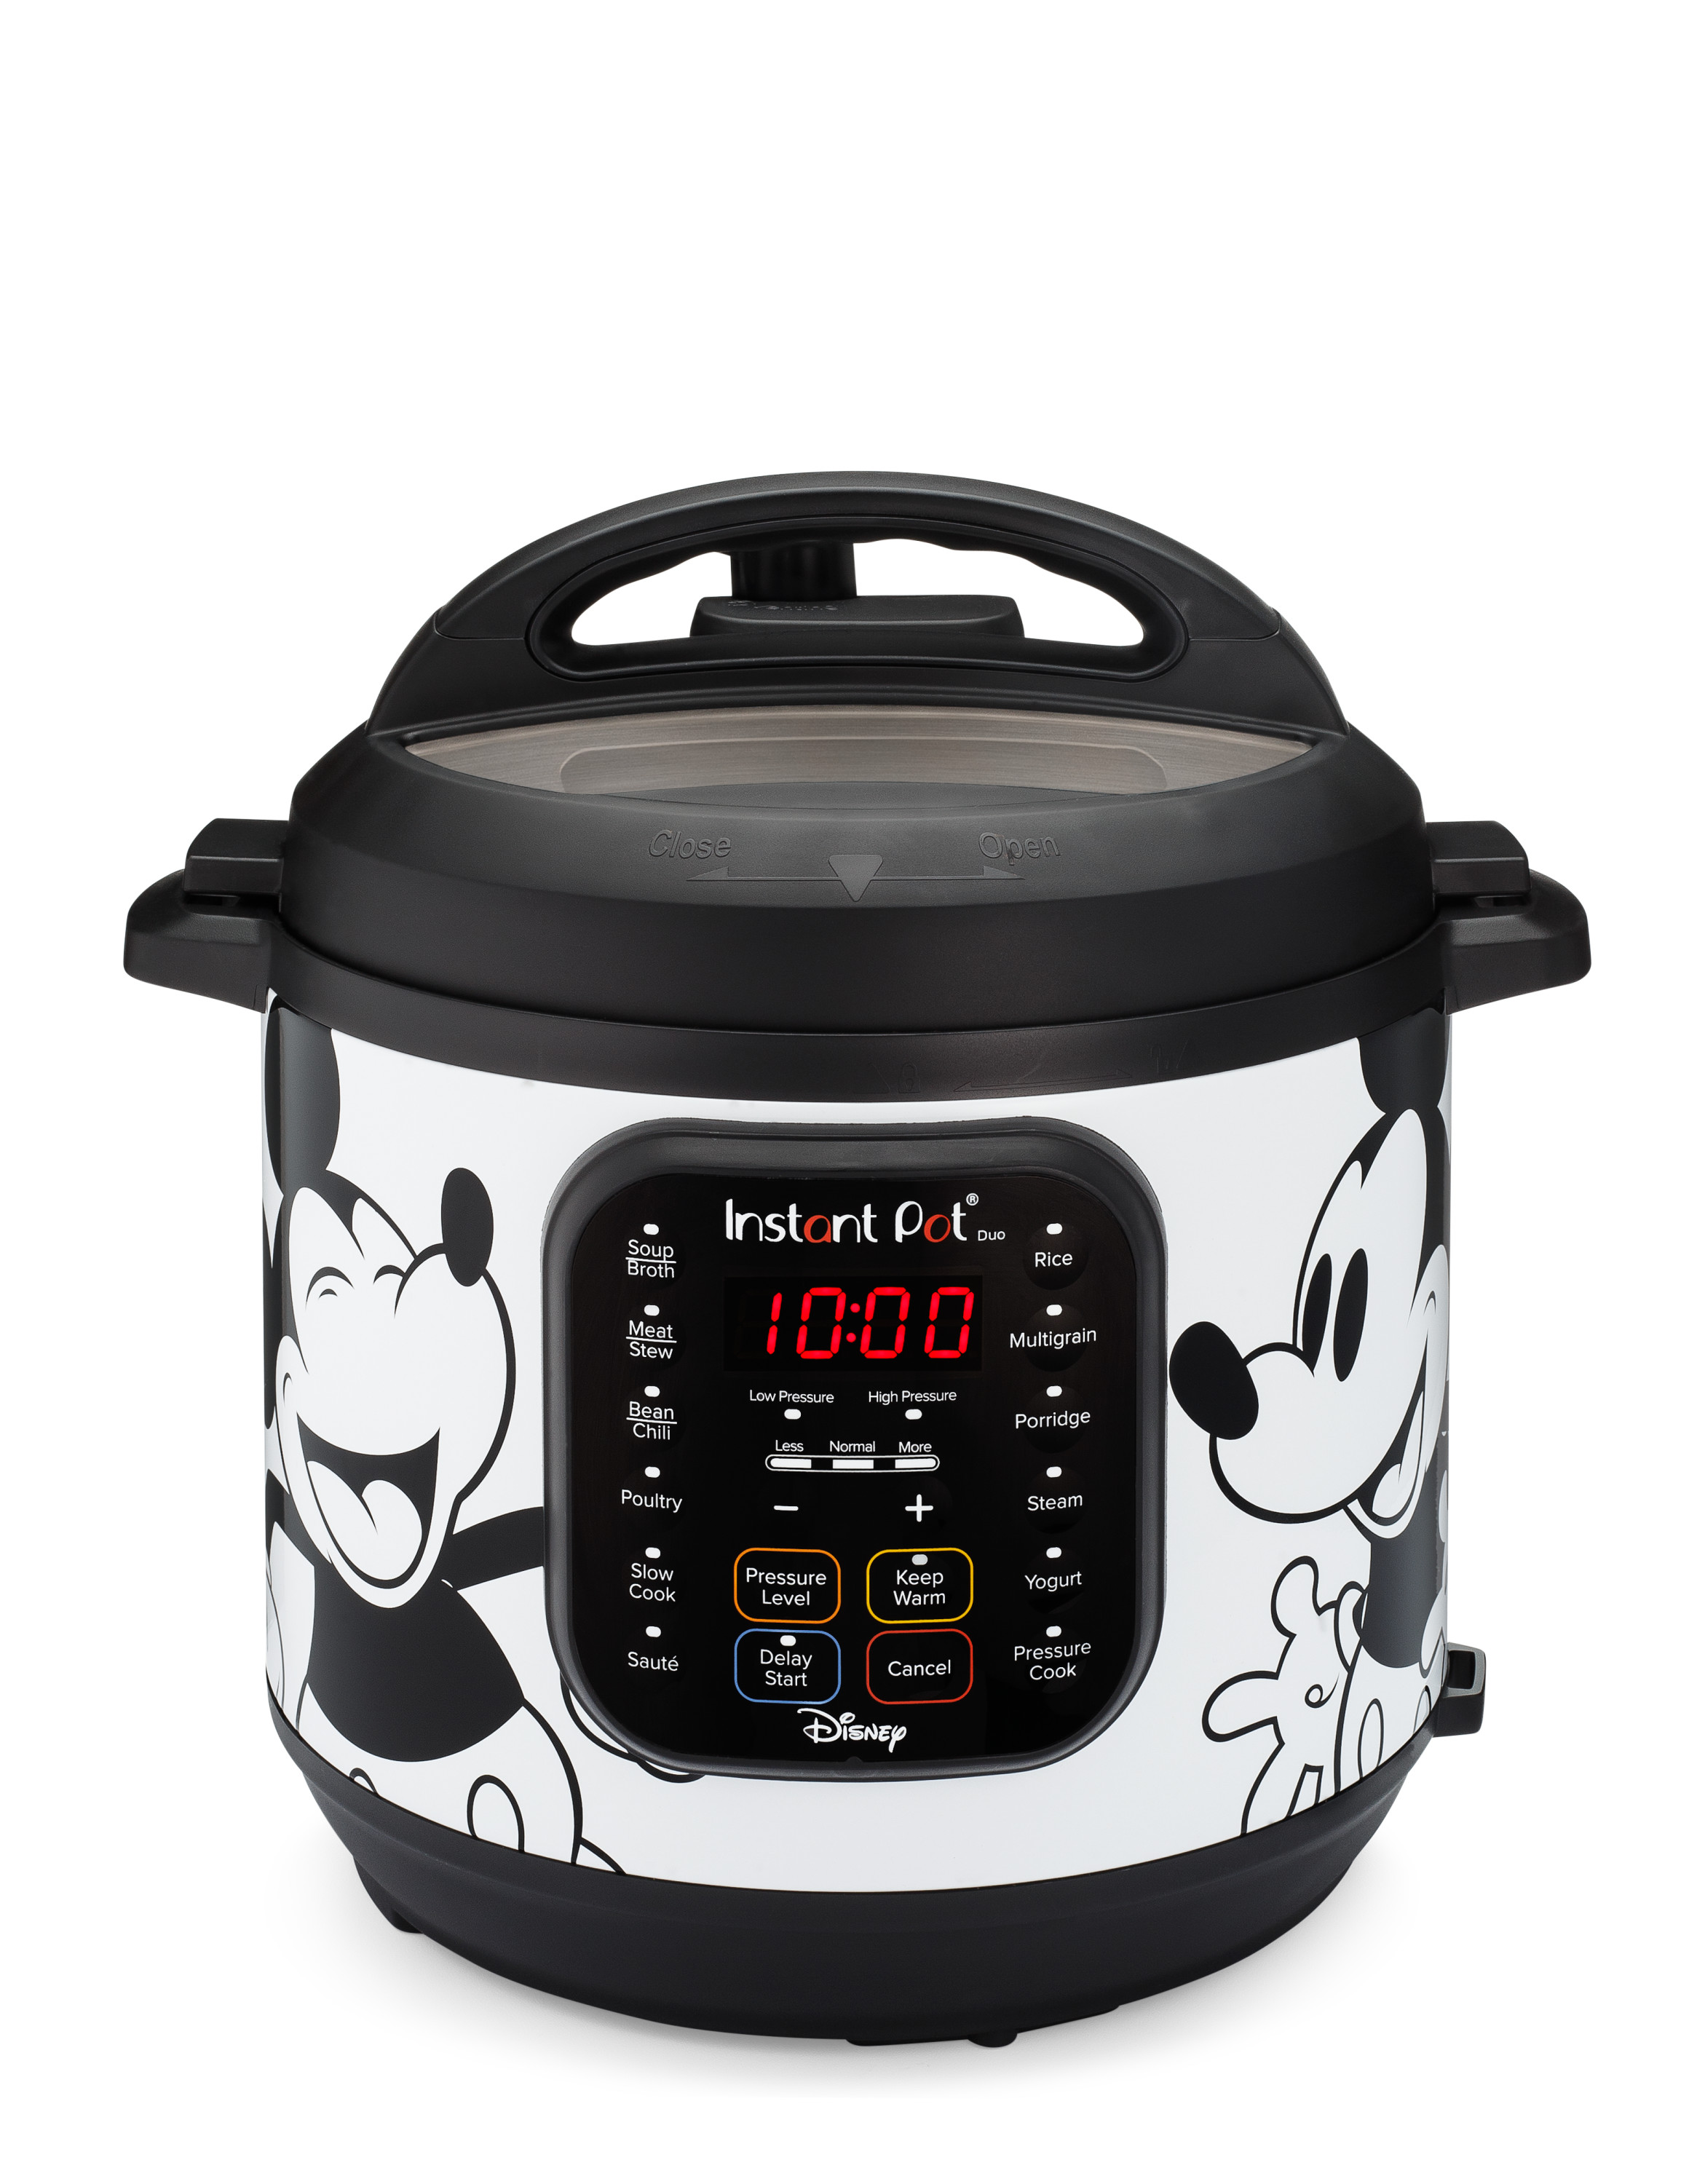 Instant Pot 6-Quart Duo Electric Pressure Cooker, 7-in-1 Yogurt Maker, Food Steamer, Slow Cooker, Rice Cooker & More, Disney Mickey Mouse, White - image 1 of 4